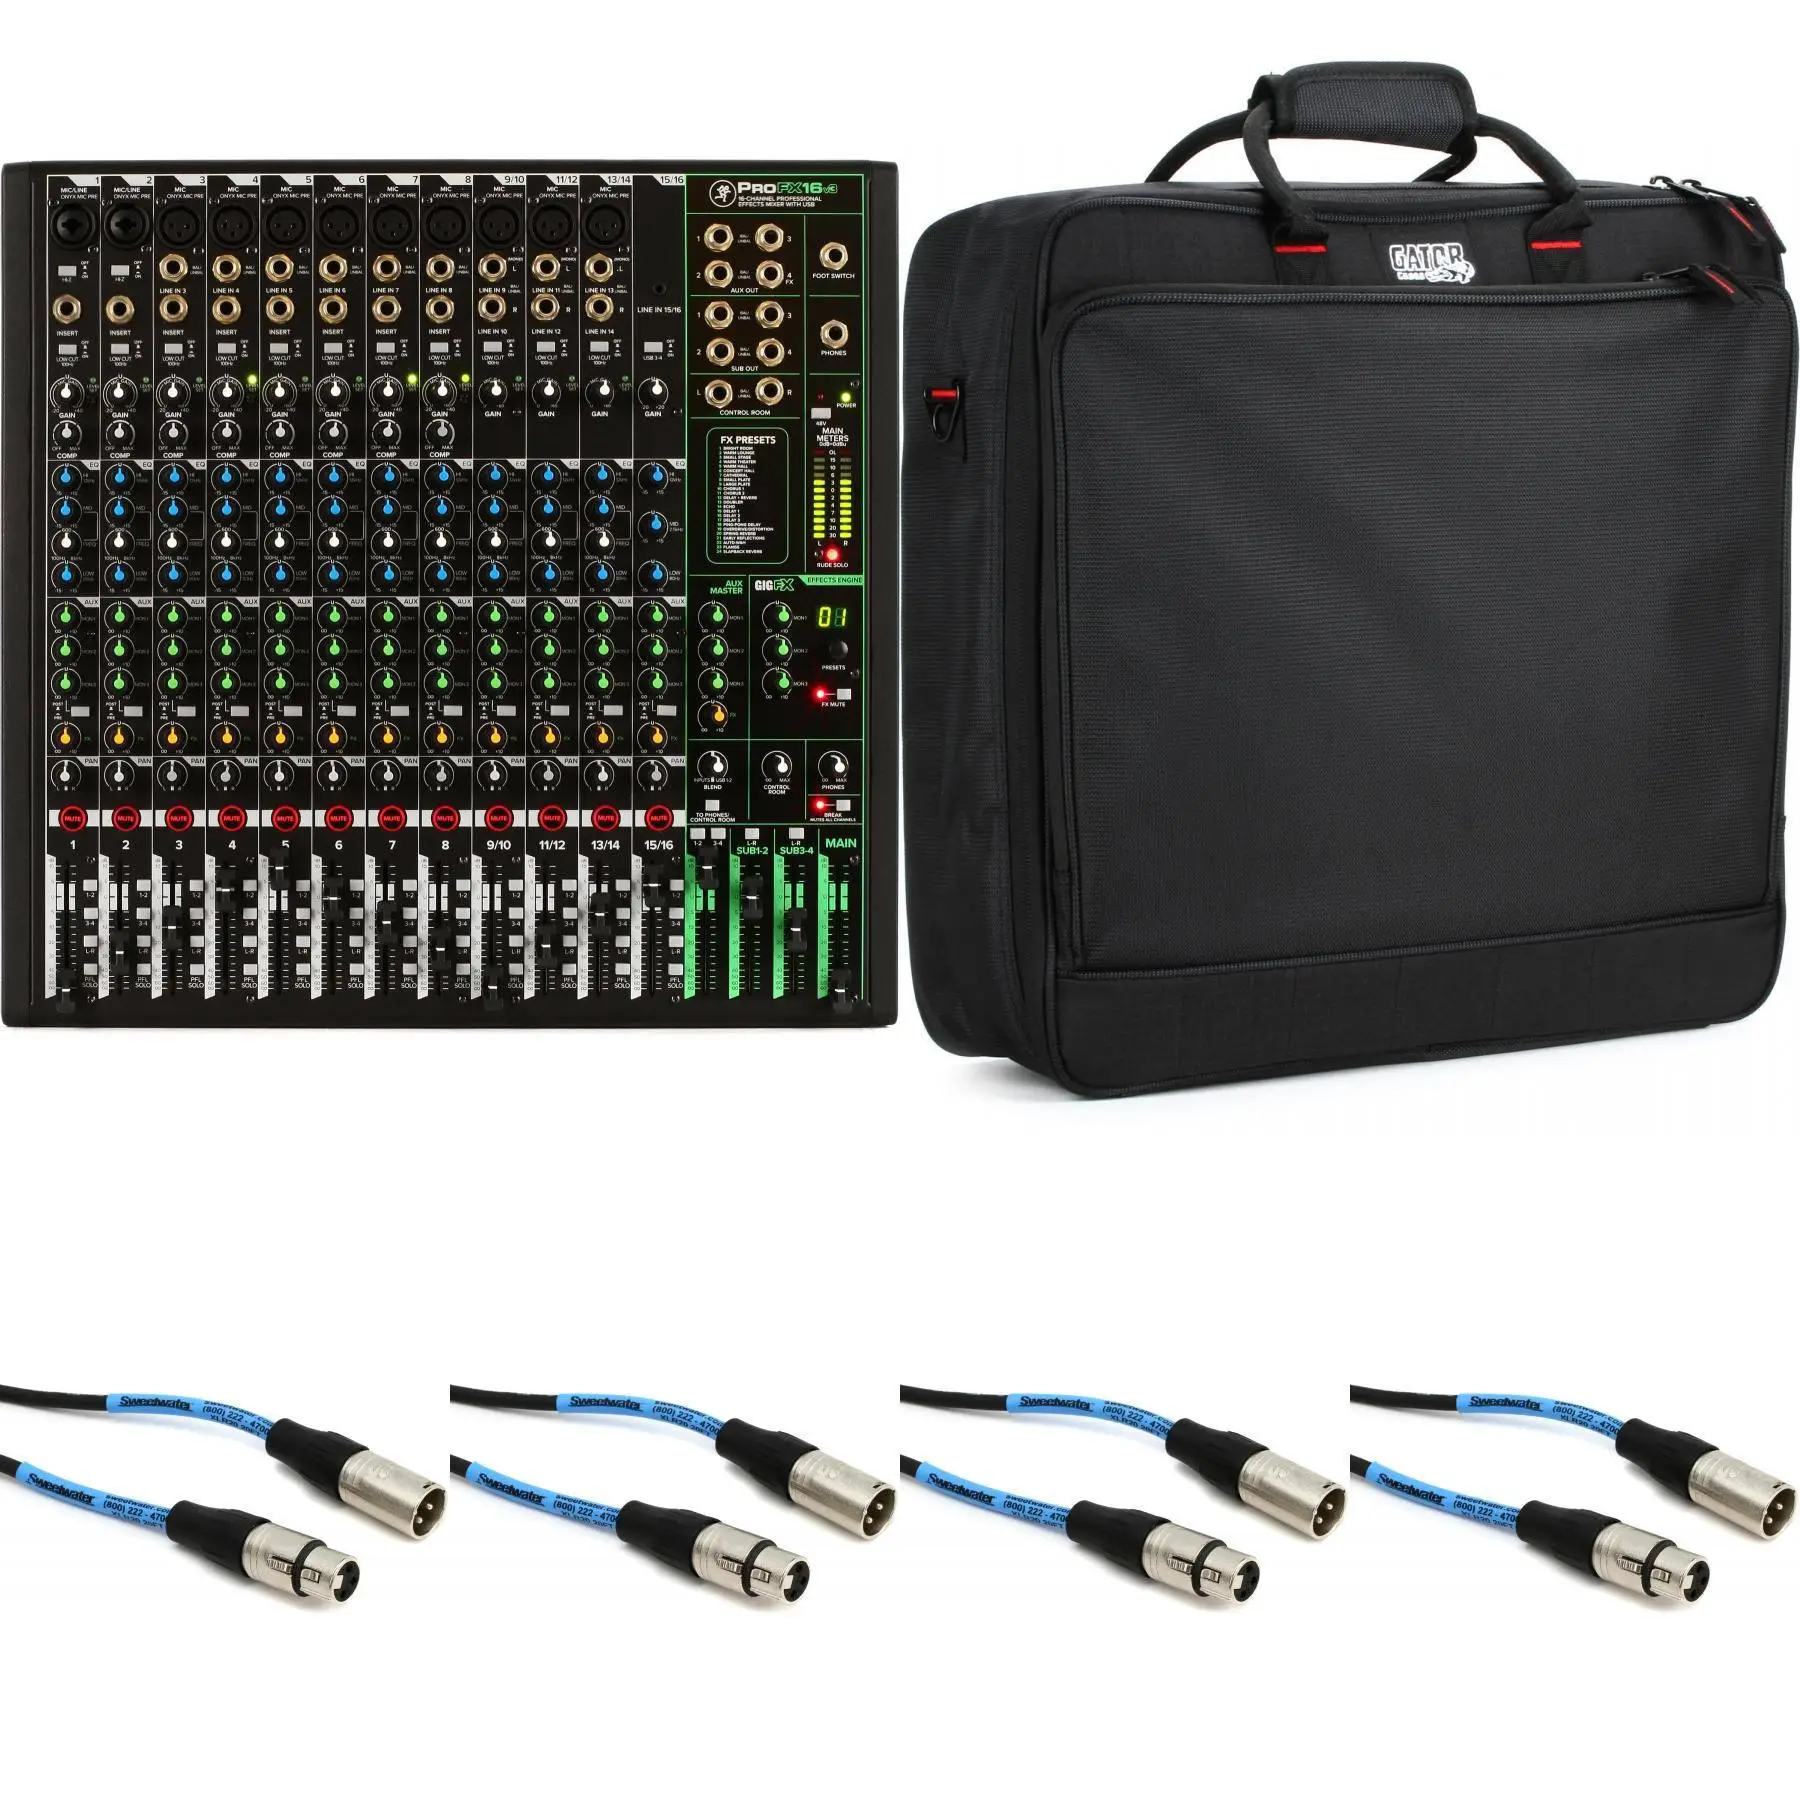 

BIG DISCOUNT ON Mackie ProFX16v3 16-channel Mixer with USB and Effects